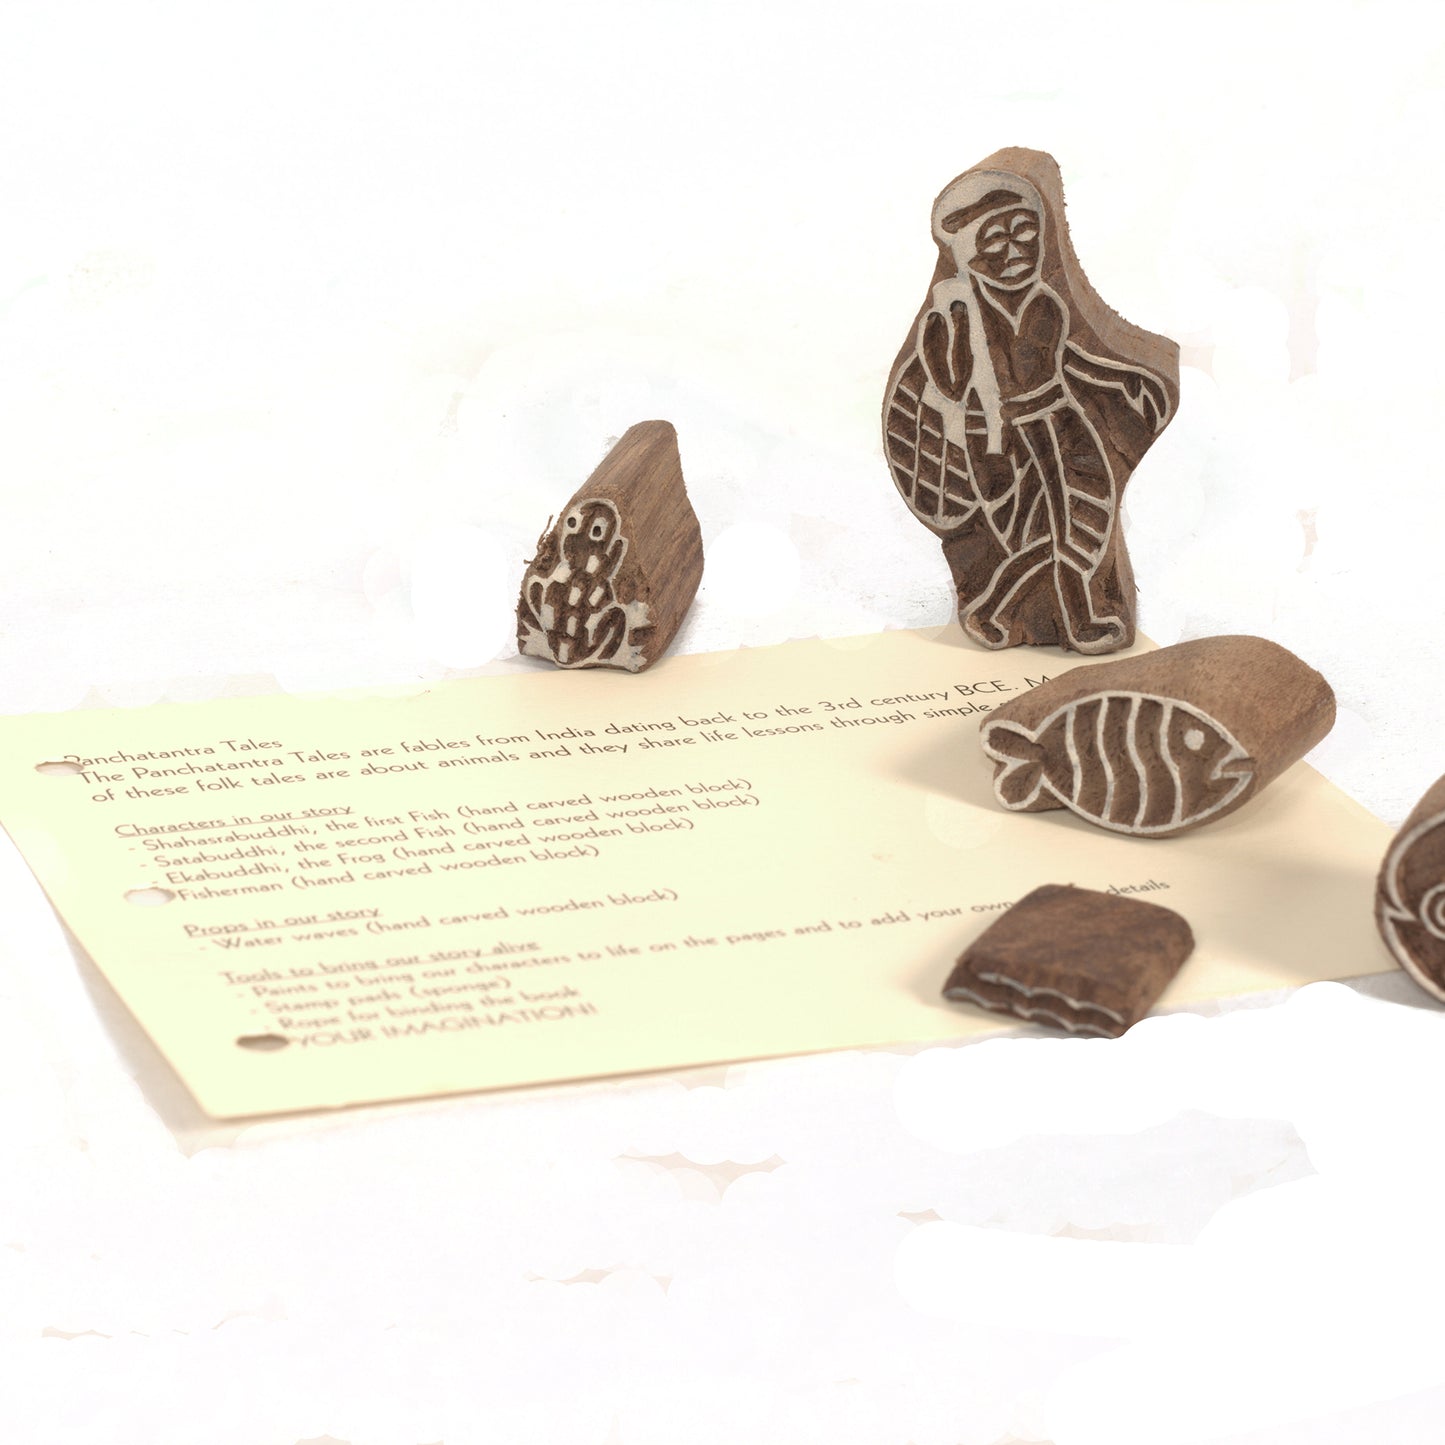 DIY Wooden Block Printing Craft kit Print your own Panchtantra Story book Two Fishes & a Frog